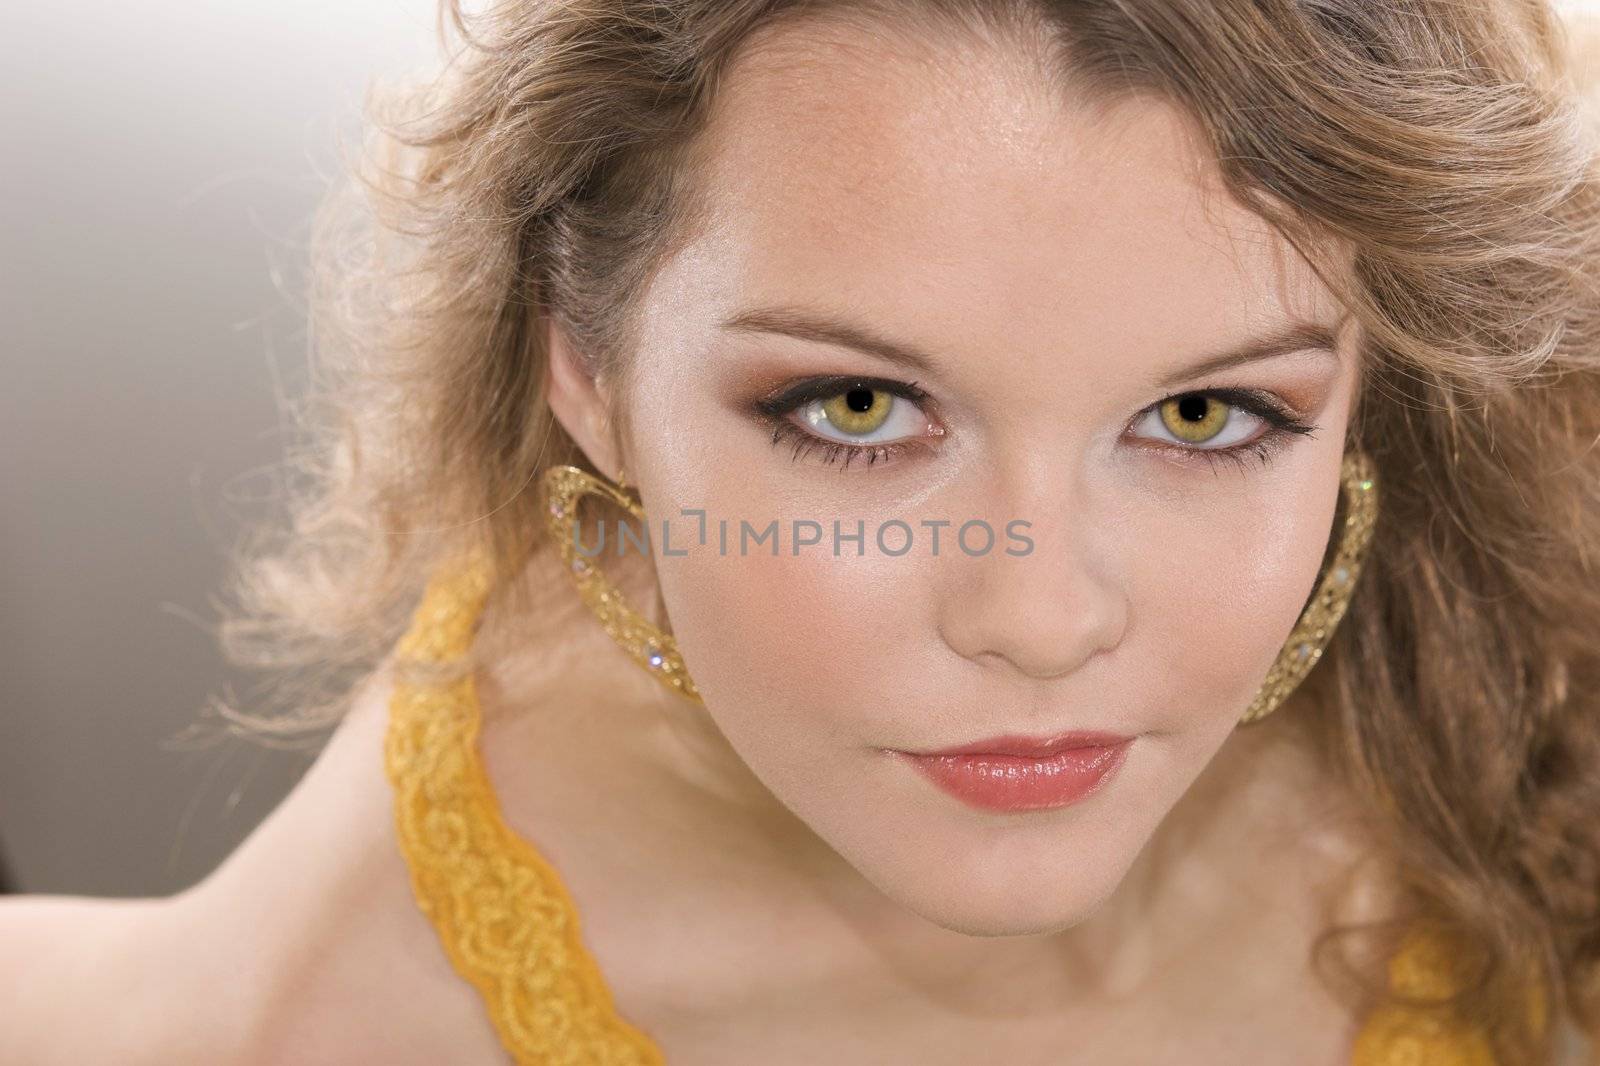 Beautiful Teenager with Fashion Makeup and Stunning Eyes